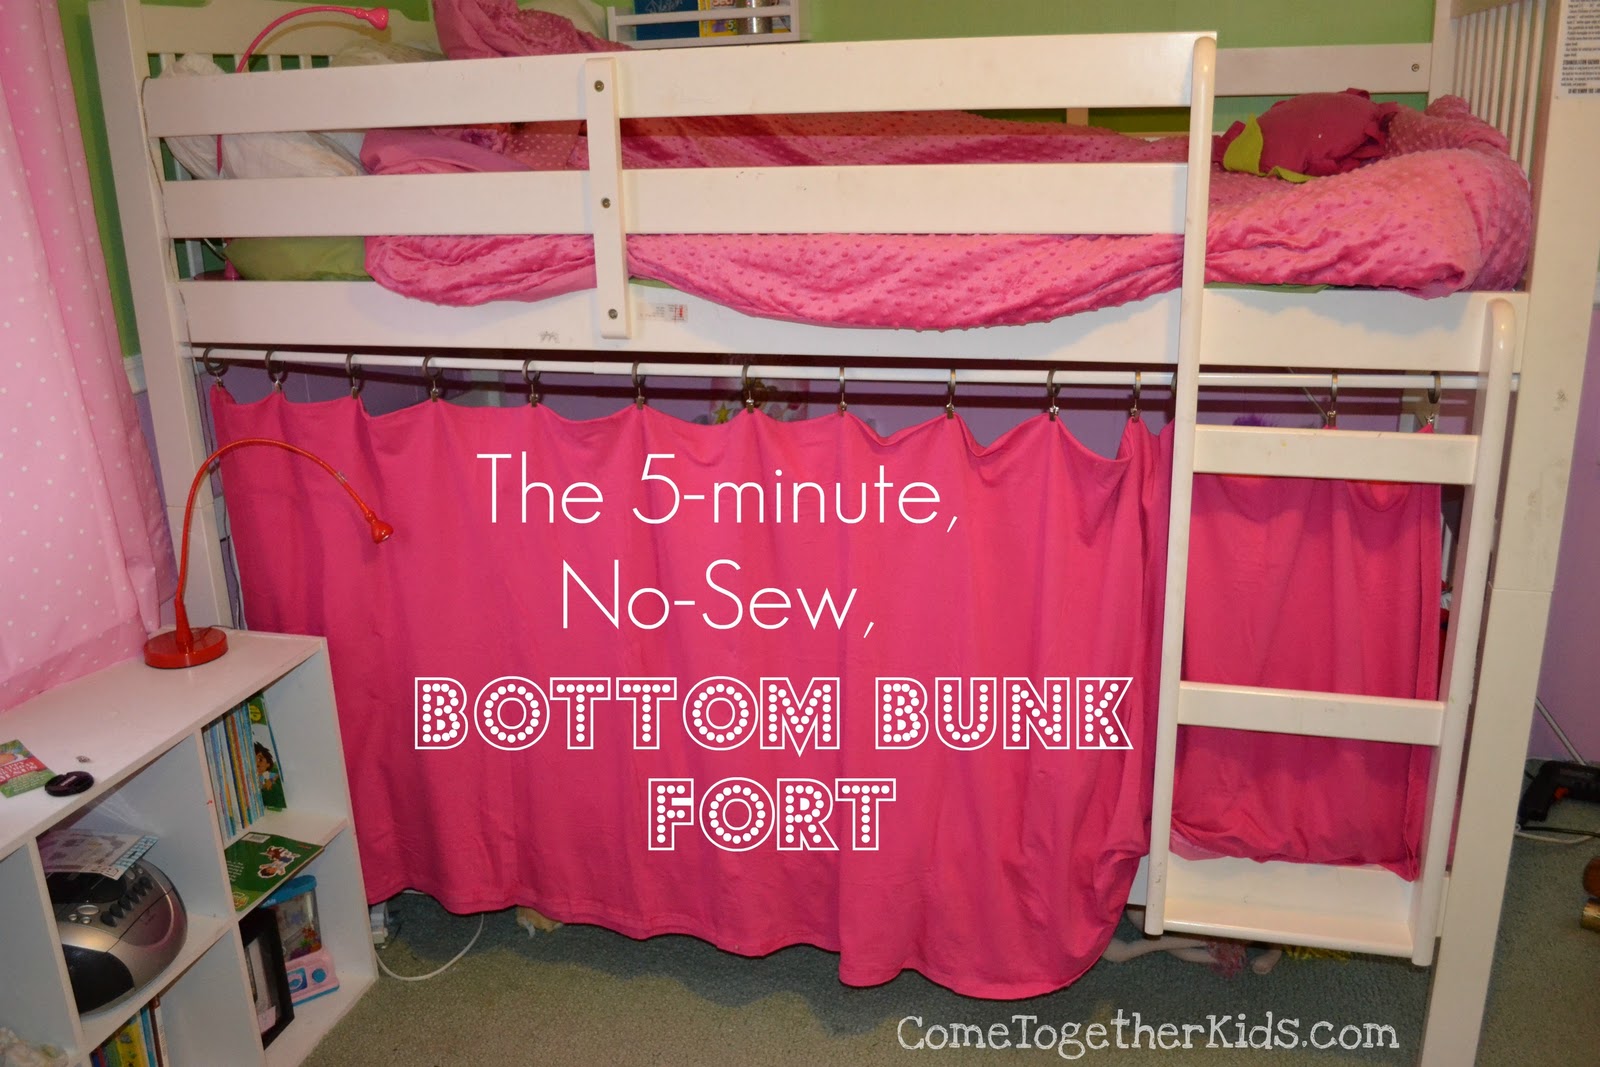 No Sew Bottom Bunk Fort, Bunk Bed Curtains Dorm